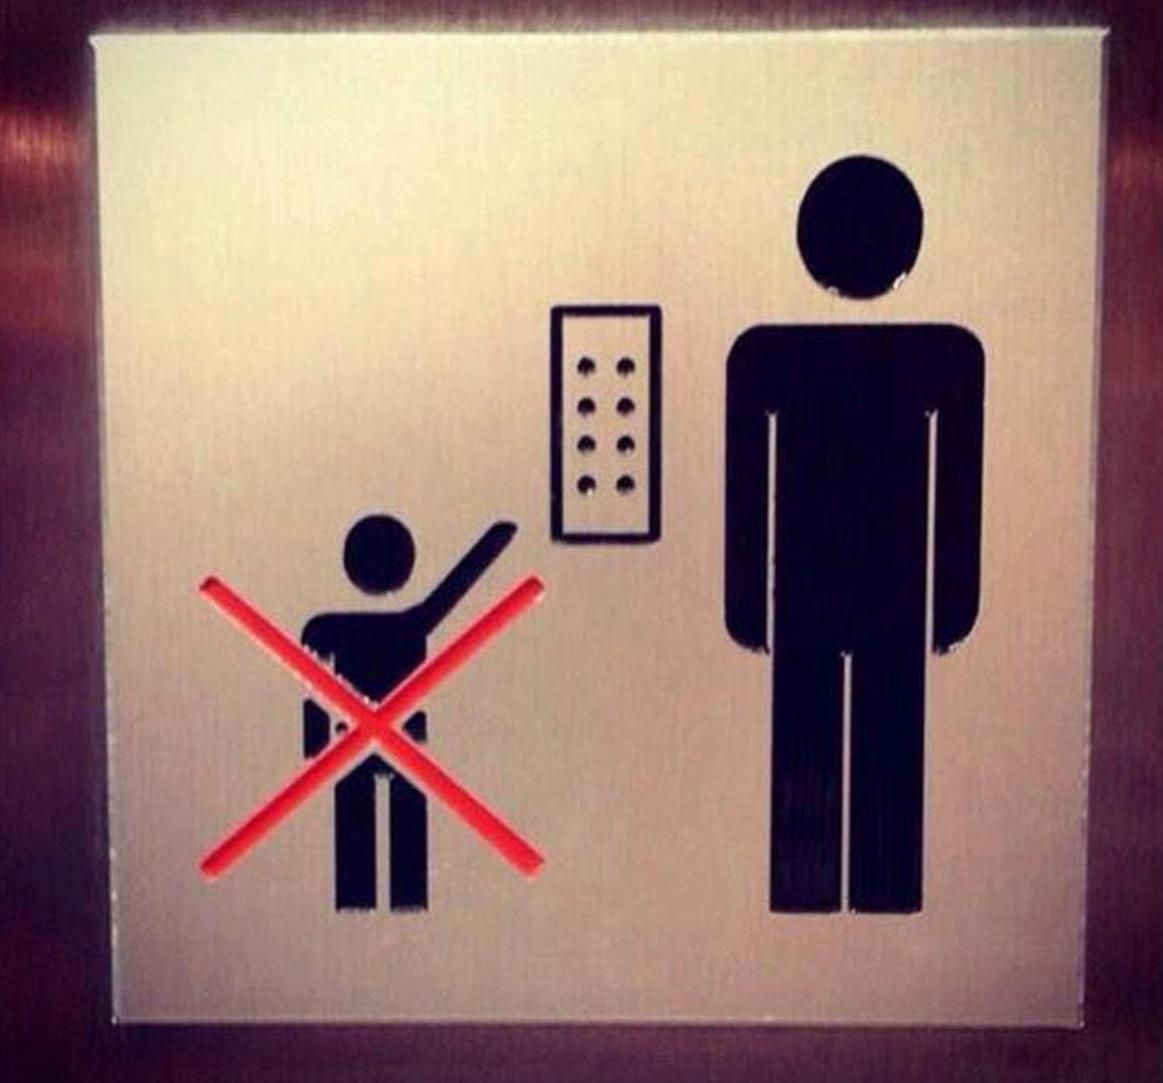 I can’t believe how this lift discriminates against giving Scottish Shortbread to dwarves